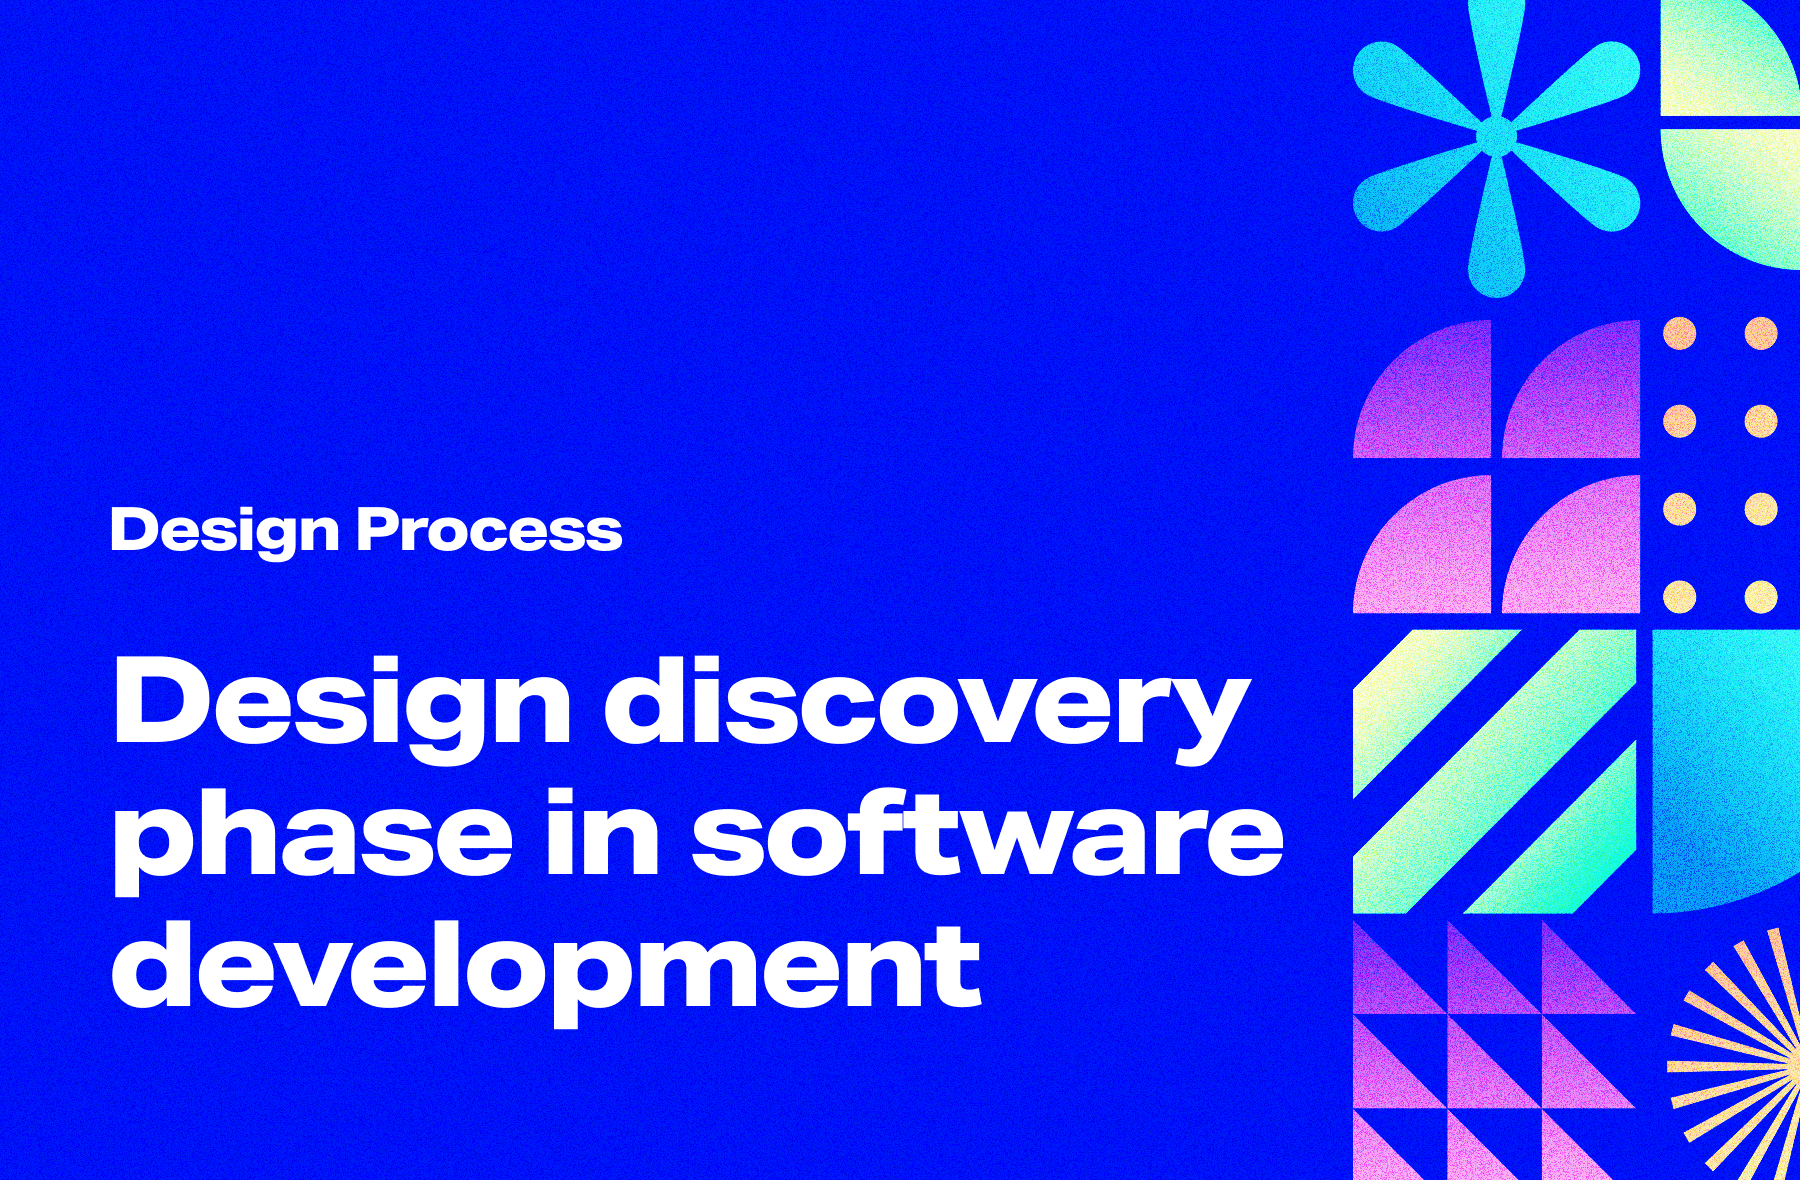 Design discovery phase. Establishing what your users want equals moving forward with successful apps